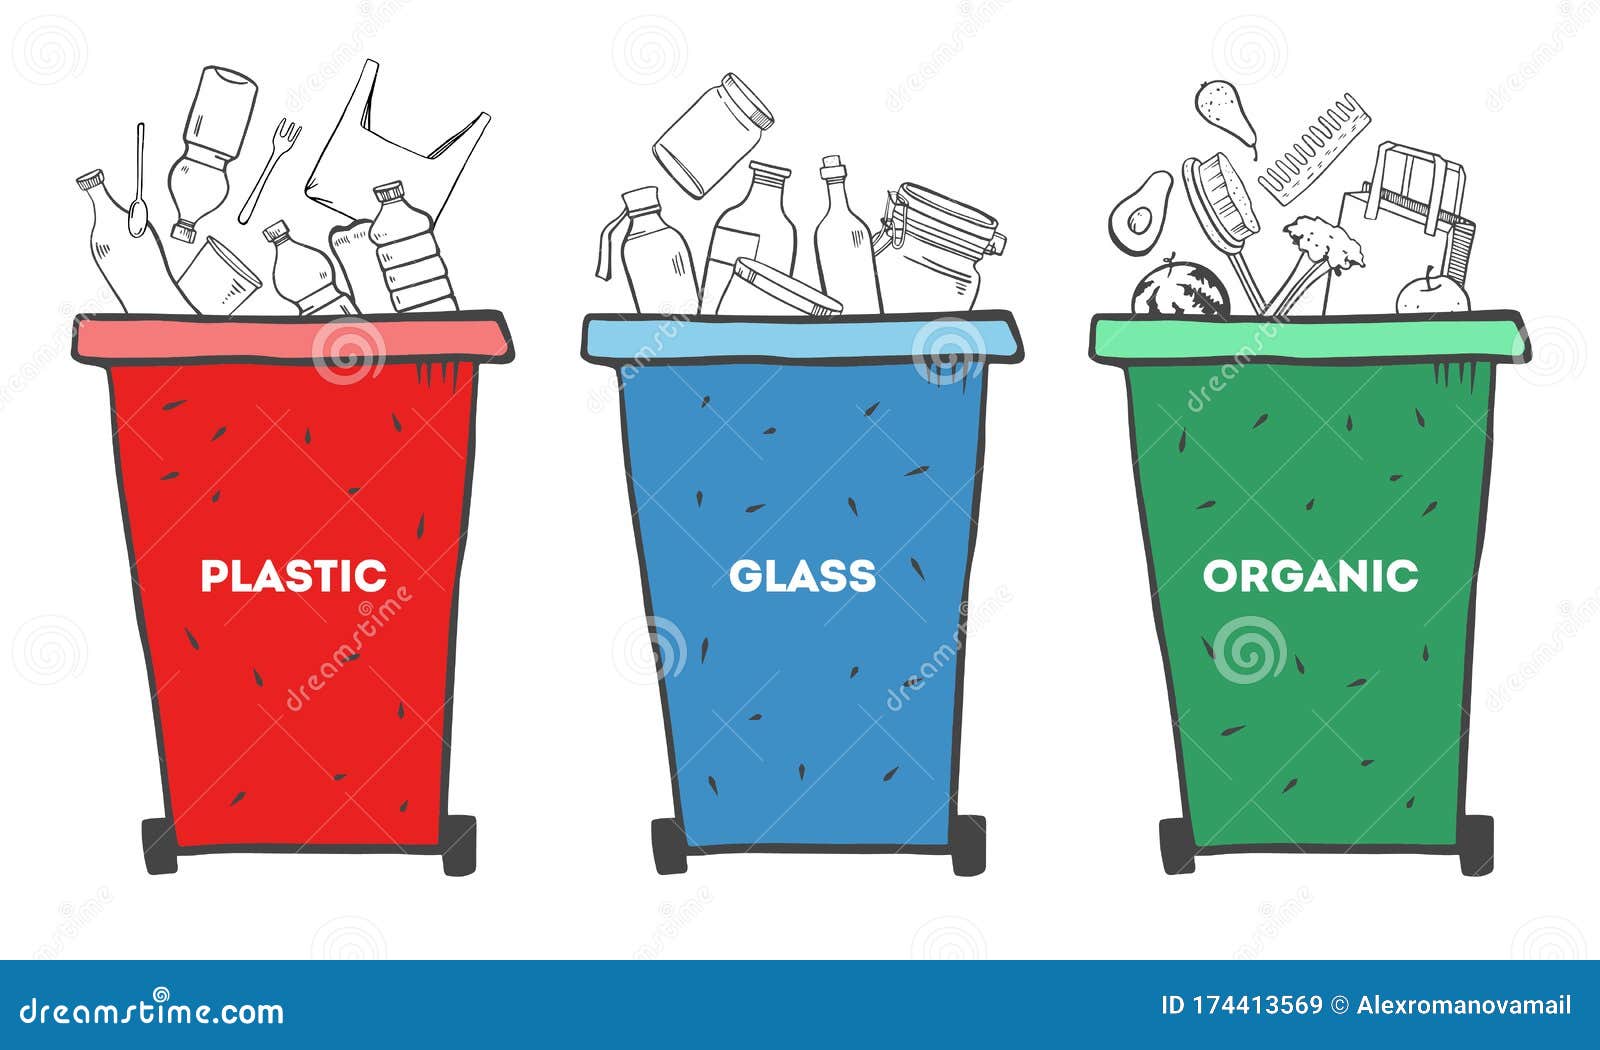 Rubbish Bin Filled with Waste Stock Vector - Illustration of dirt, sketch:  59543015